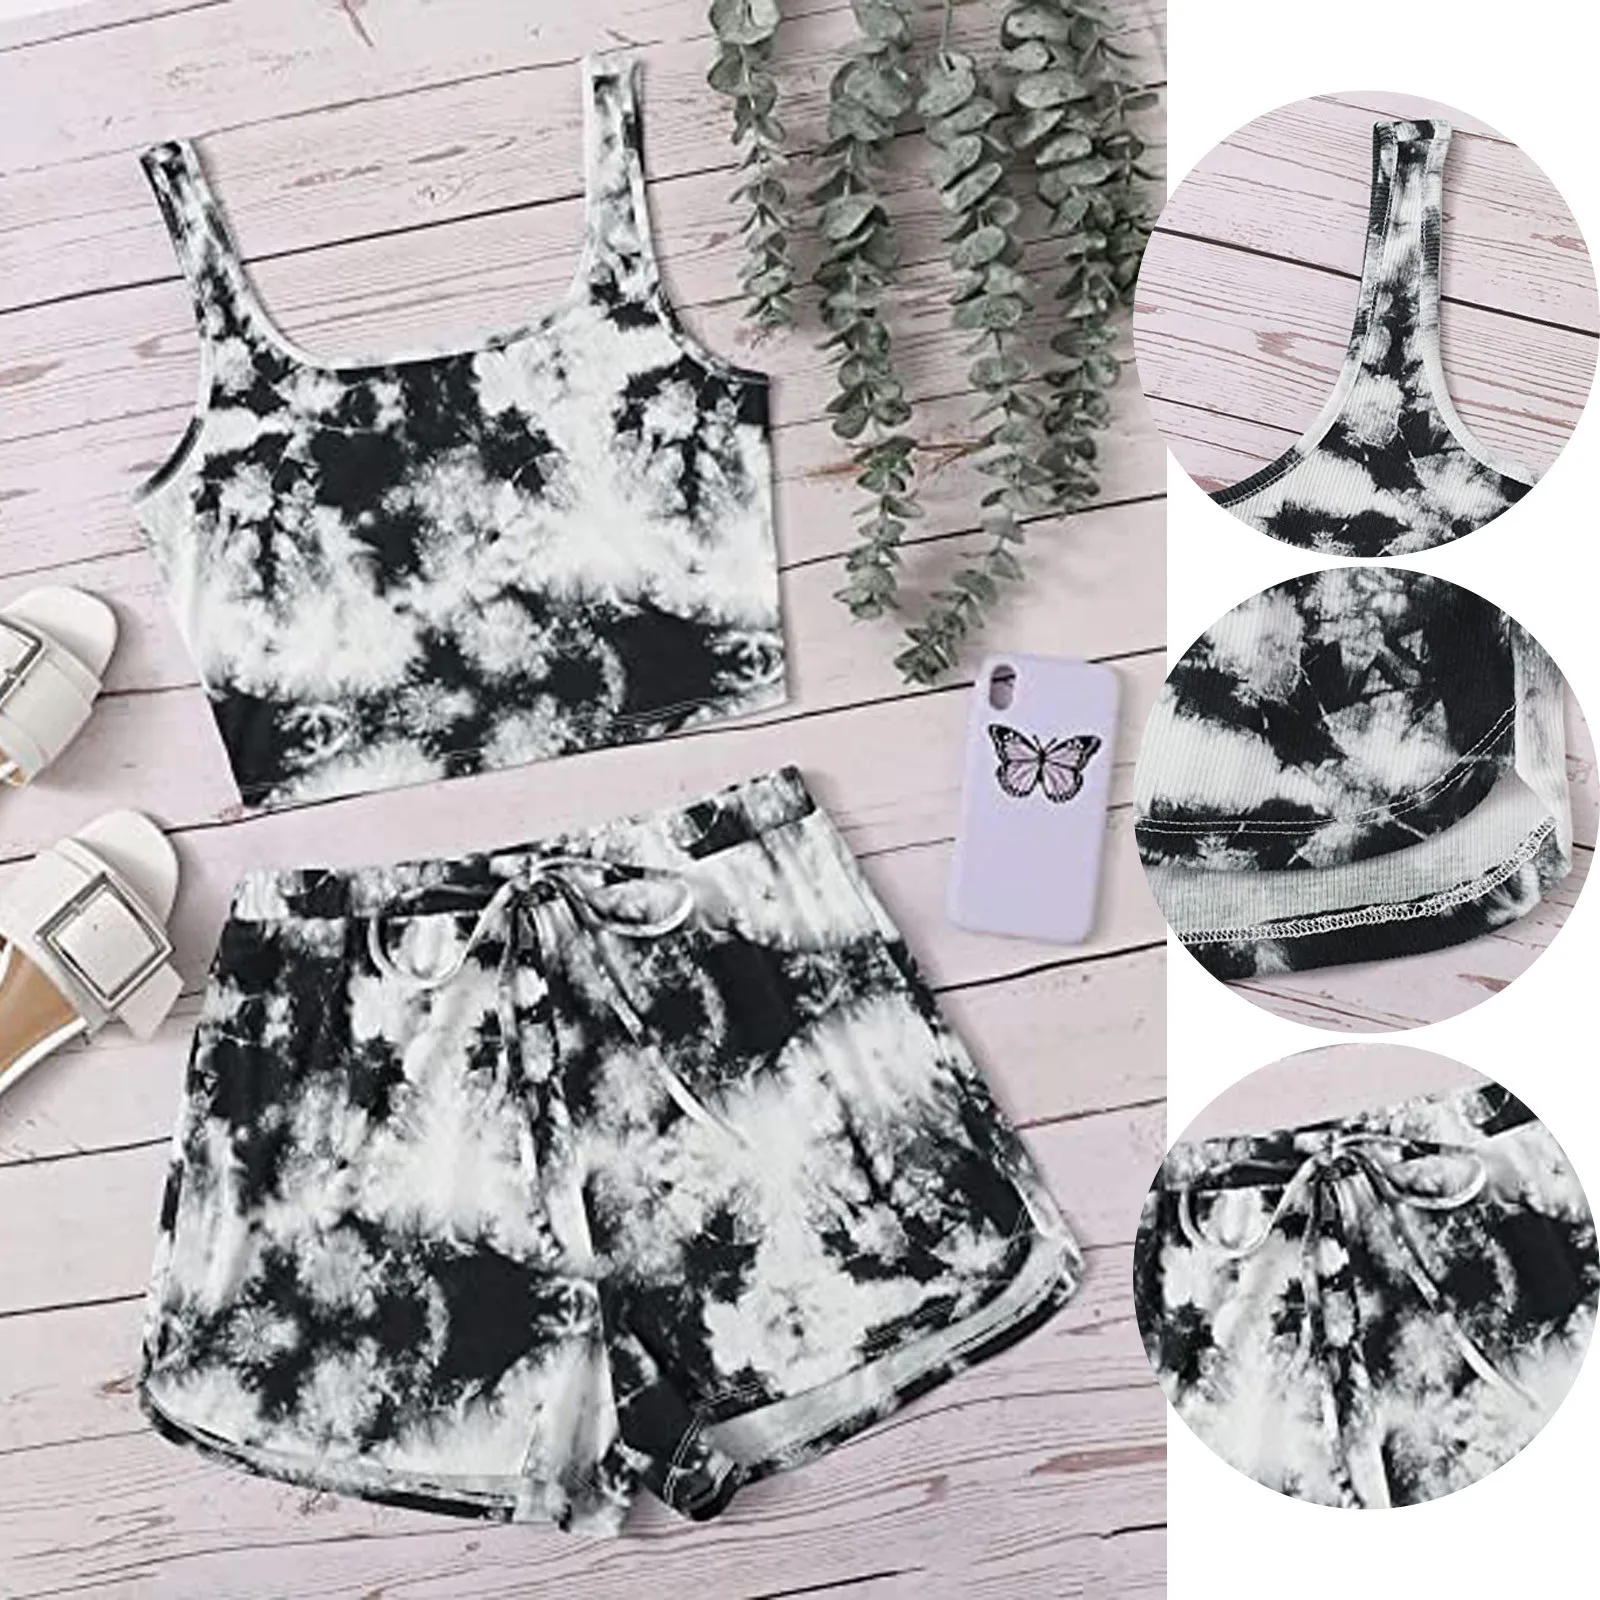 cute two piece sets 2PCS/Set Sexy Women Sleeveless Tie Dye Strap Bustiers Tank Vest Crop Tops Lace Up High Waist Shorts Trousers Tracksuit Summer two piece skirt set